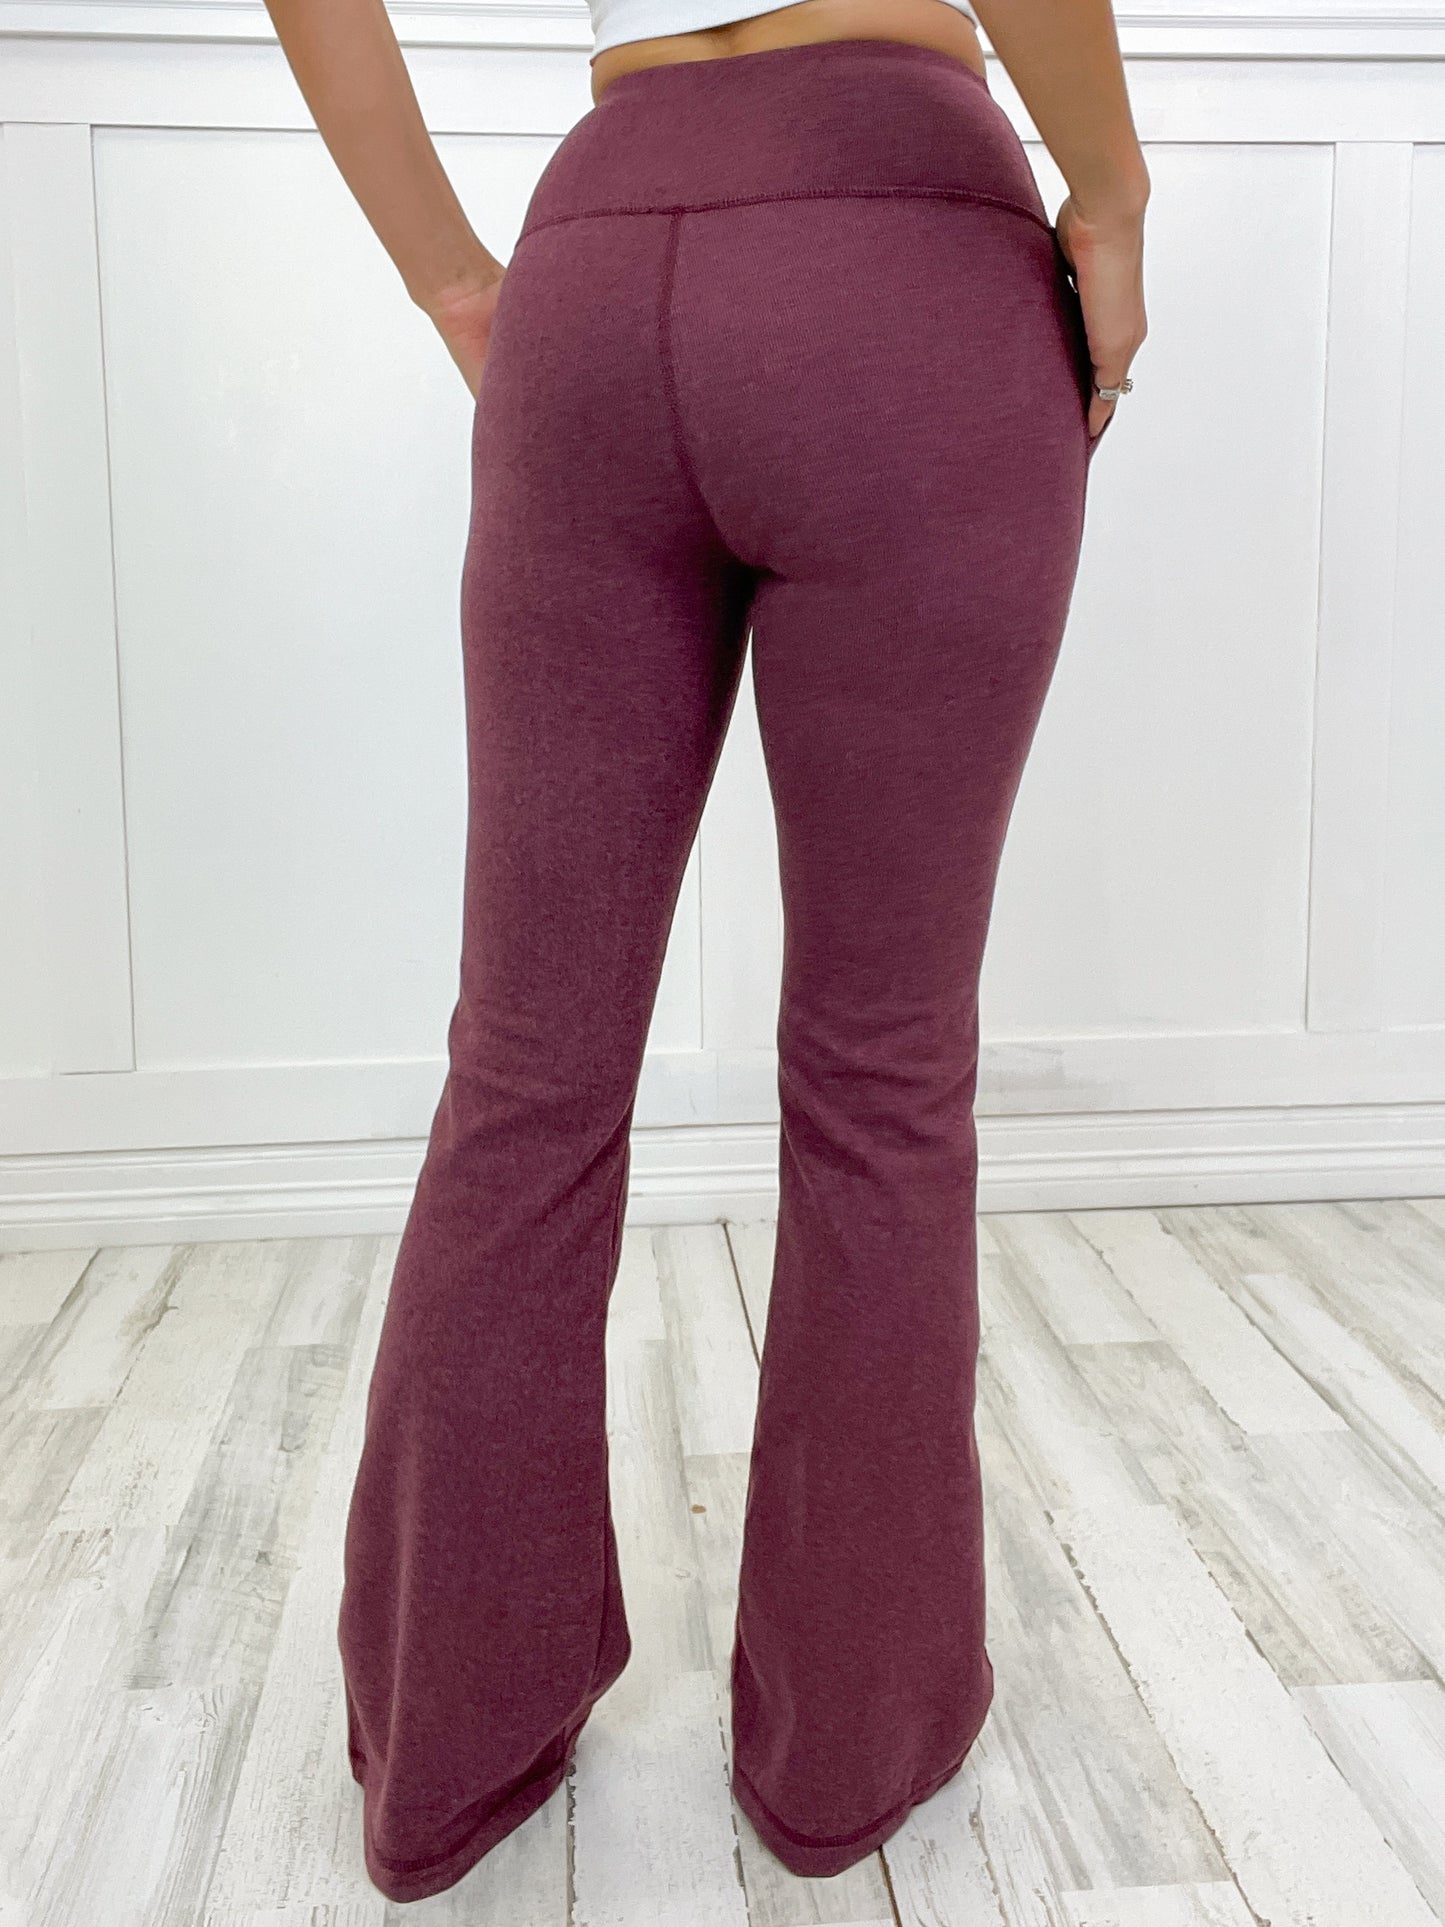 Leap Rib Brushed High-Rise Bell Bottom Pant with Side Pockets - B